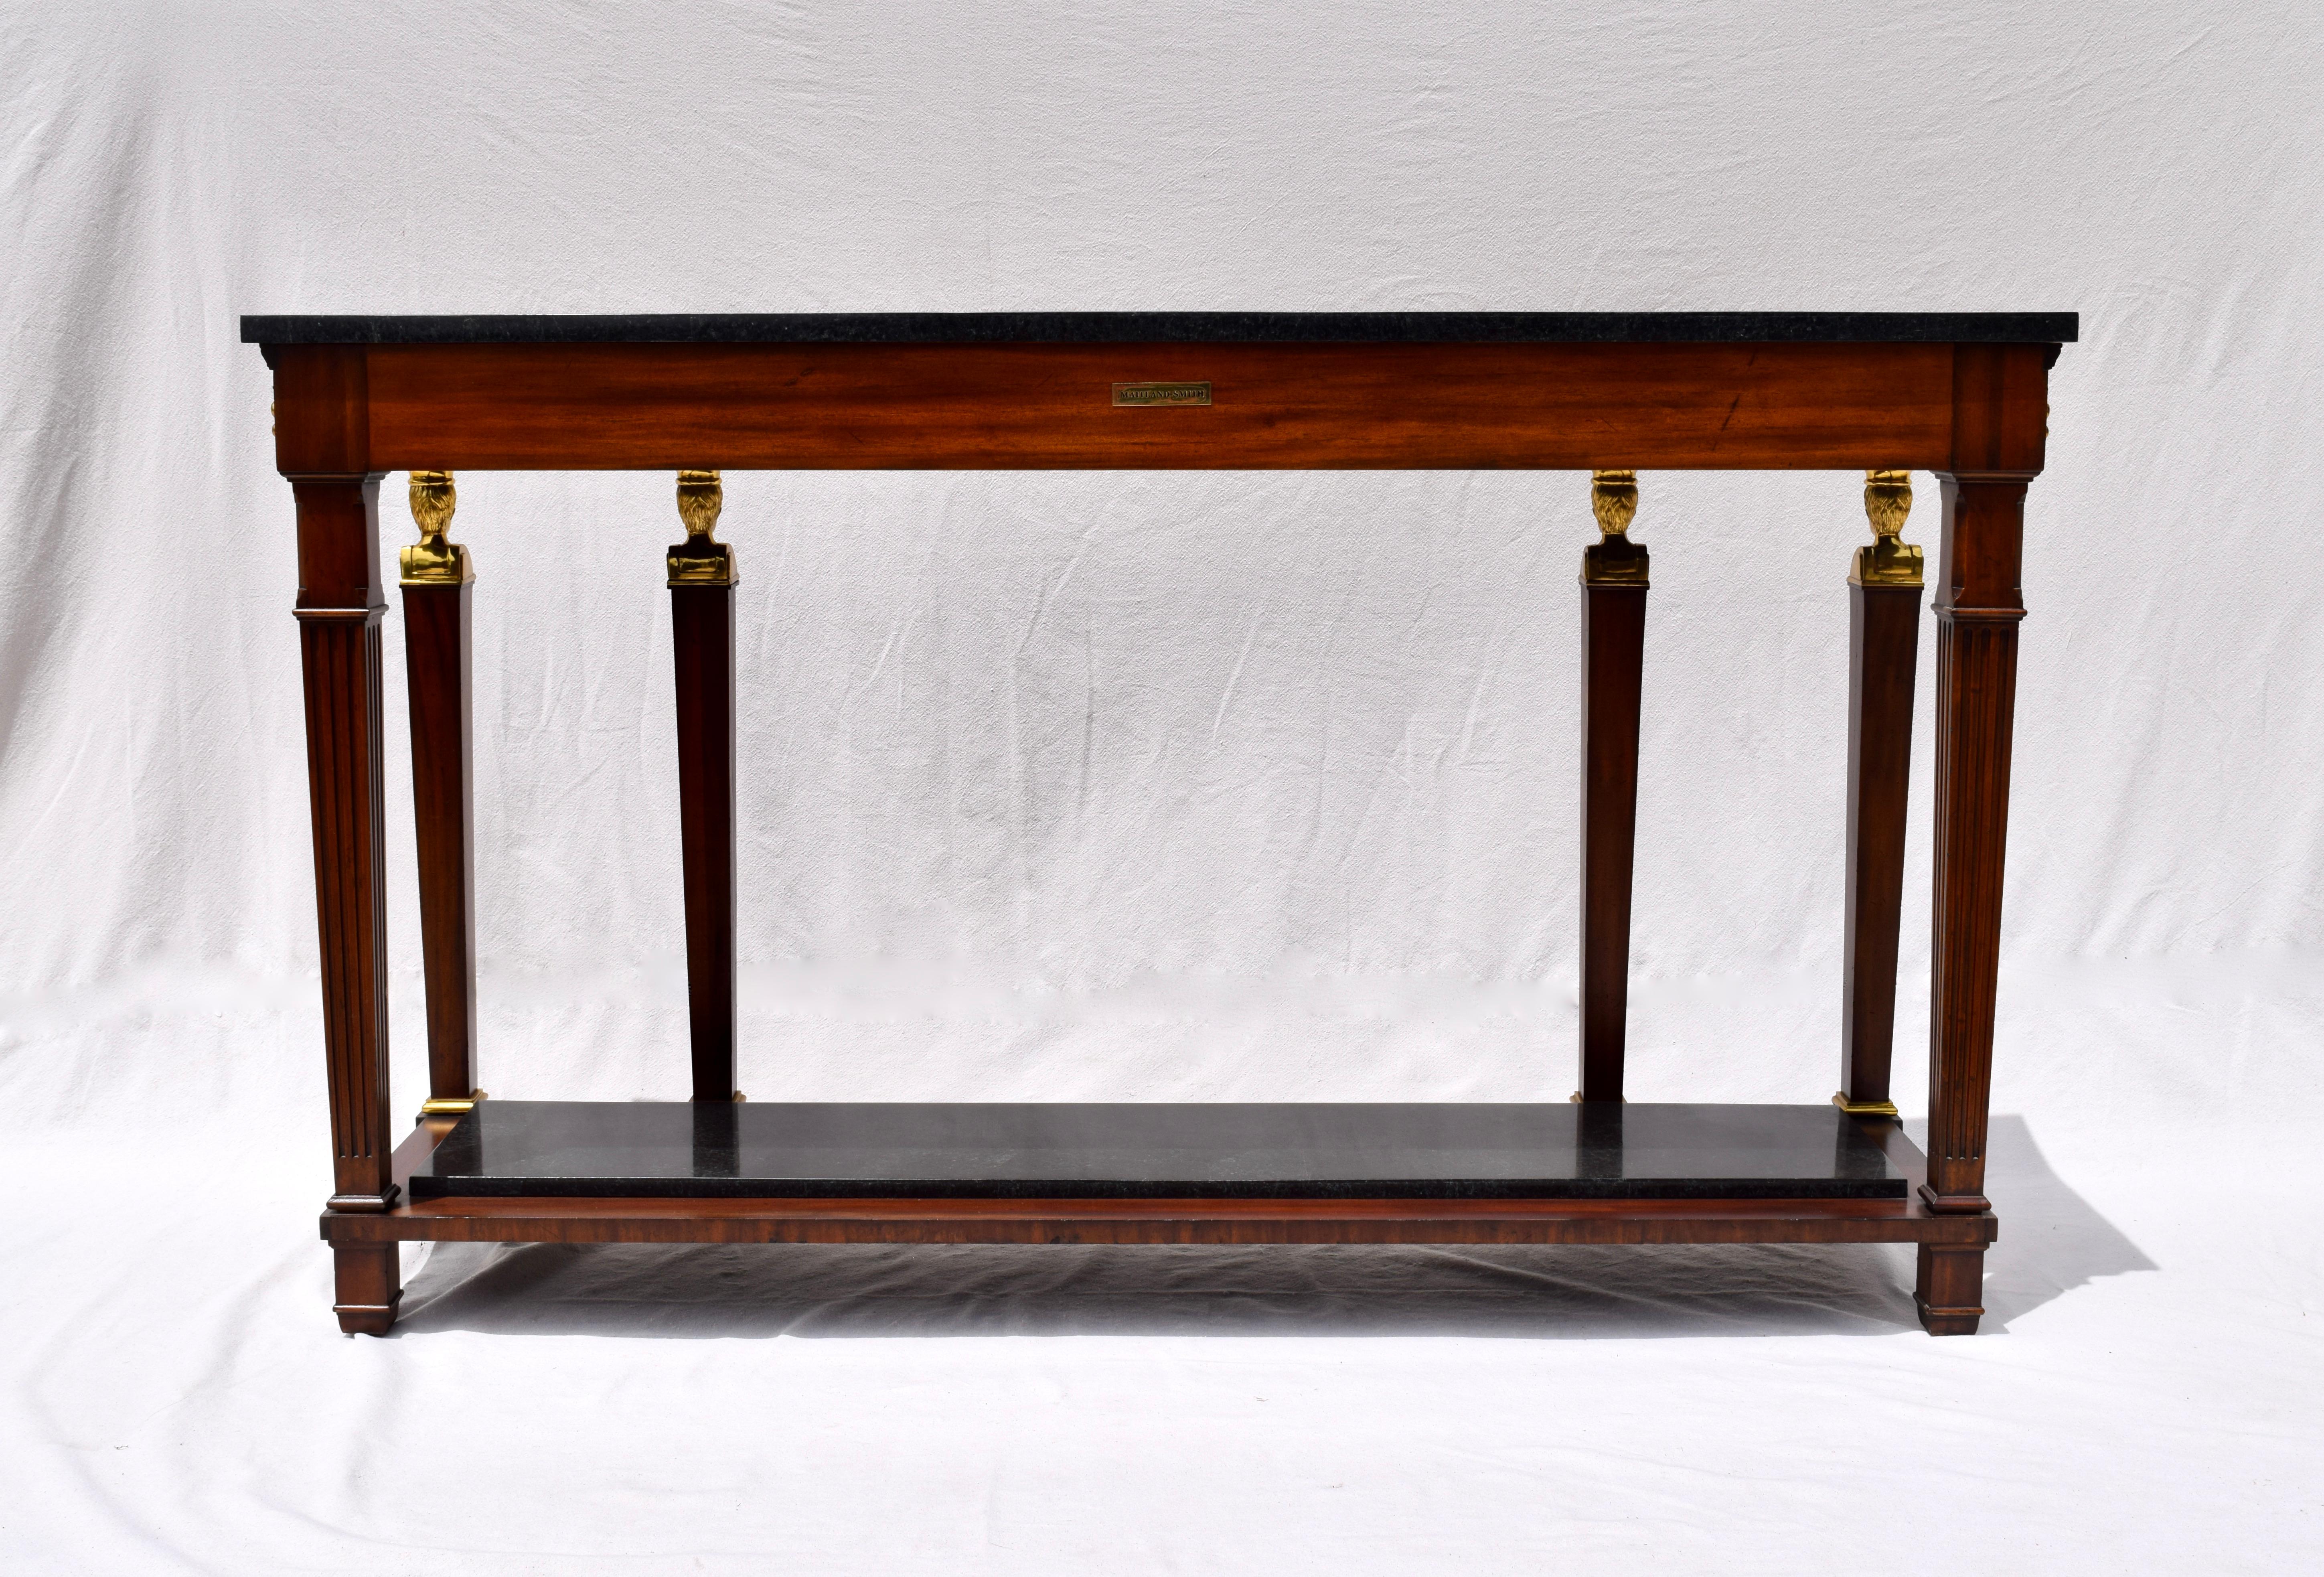 Neoclassical French Empire Style Pier Table by Maitland Smith 3